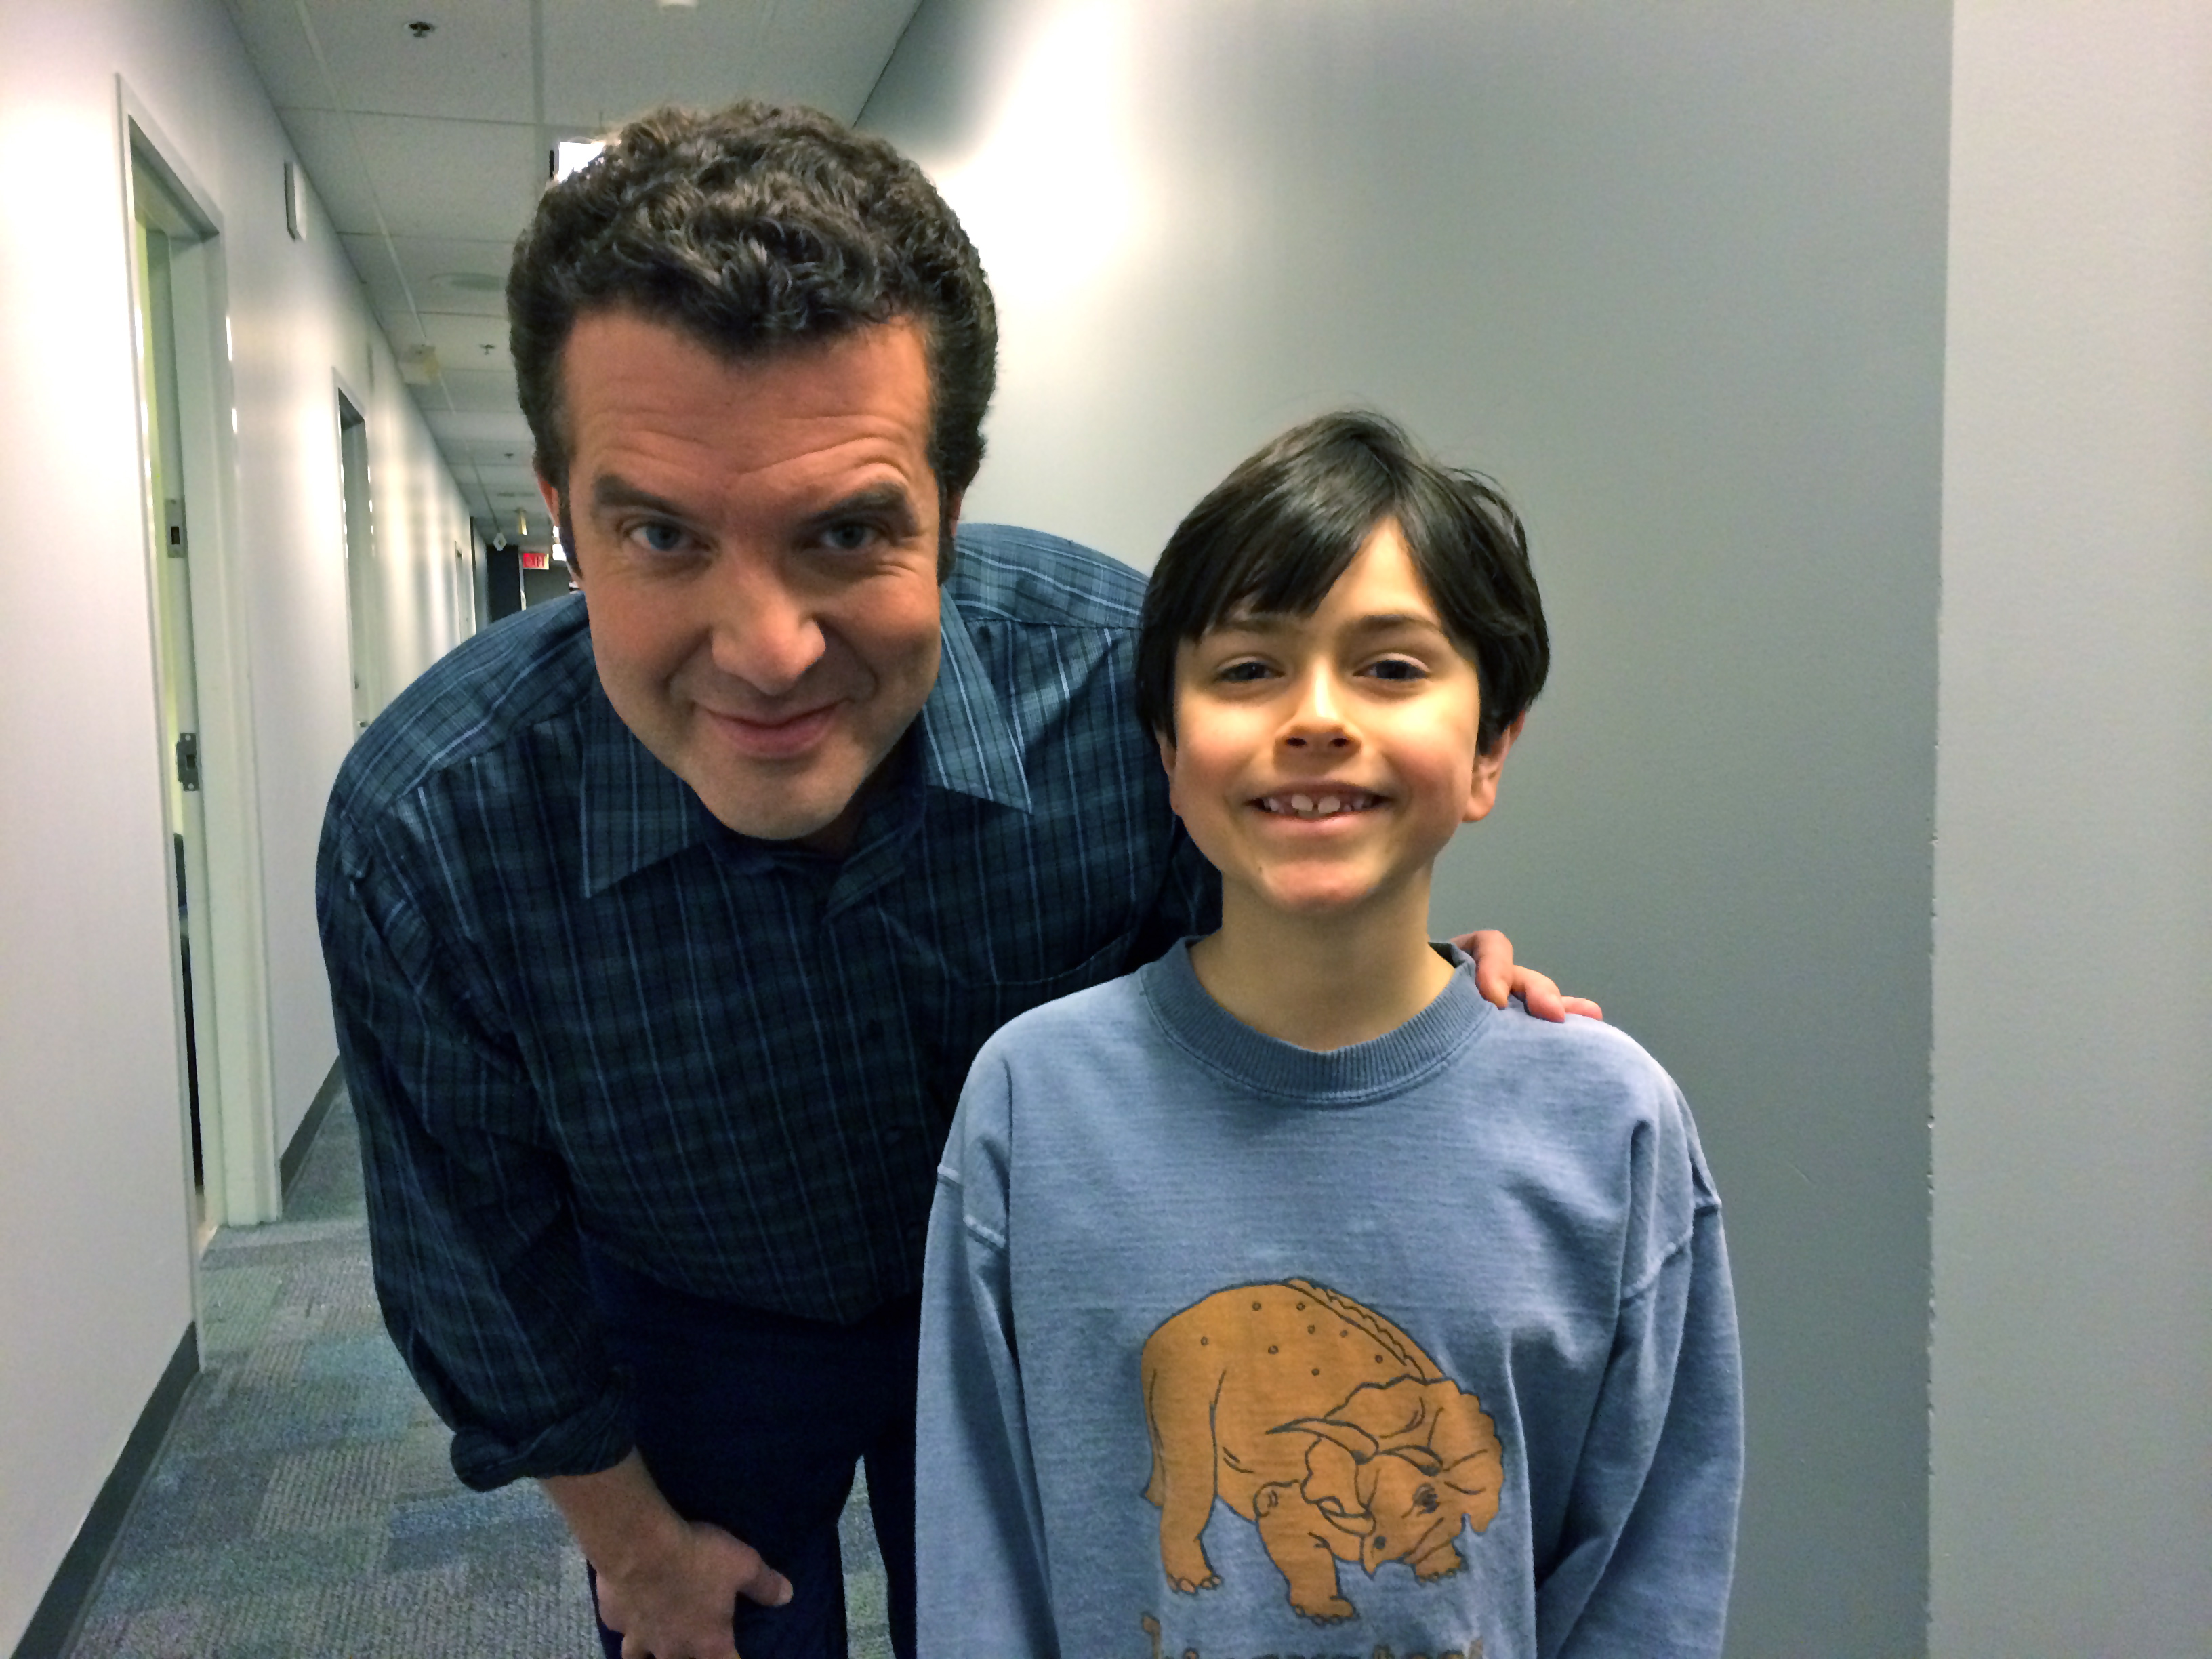 Samuel with Rick Mercer on the set of his show where he played Rick's son